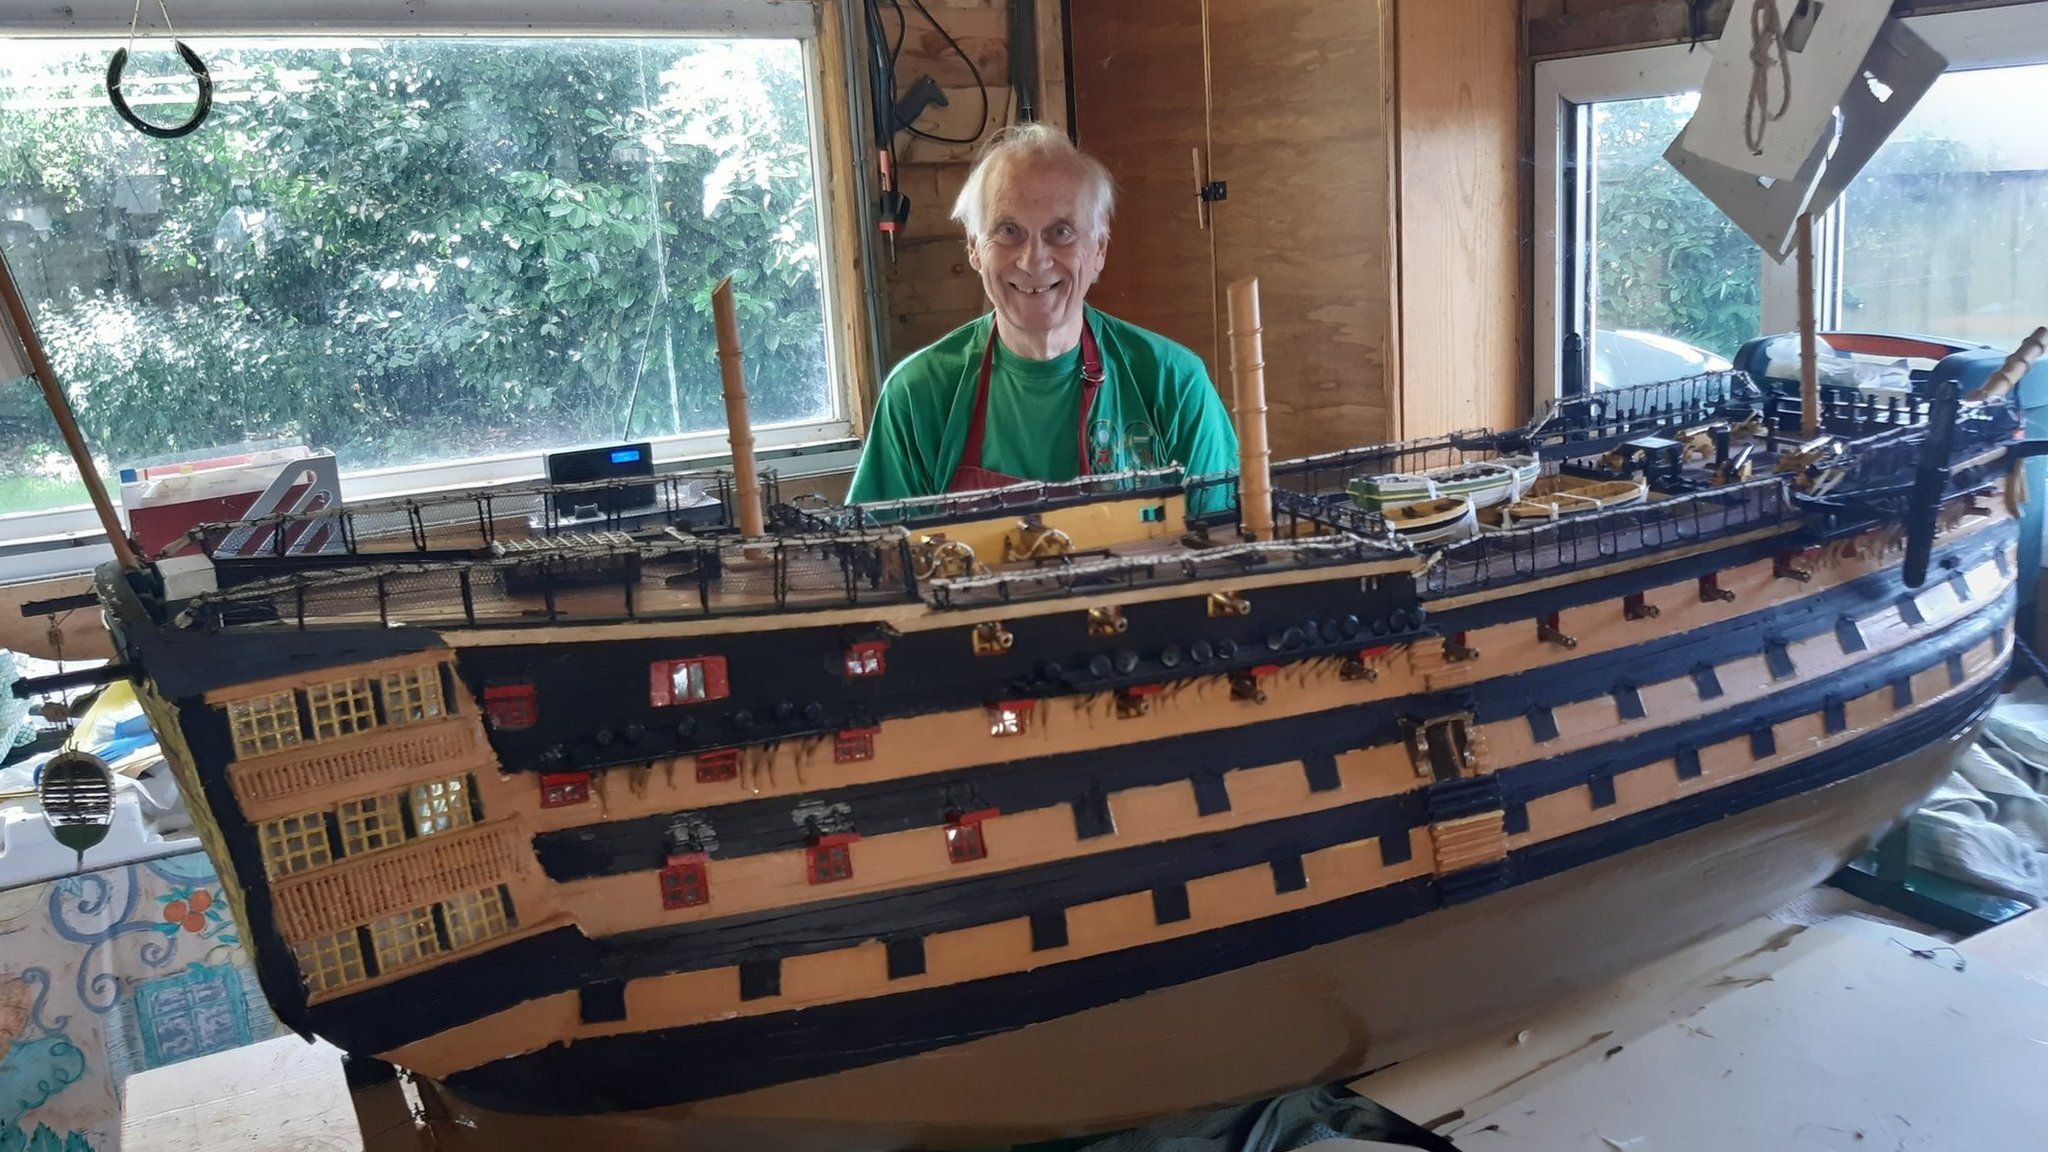 Michael Byard with his HMS Victory model